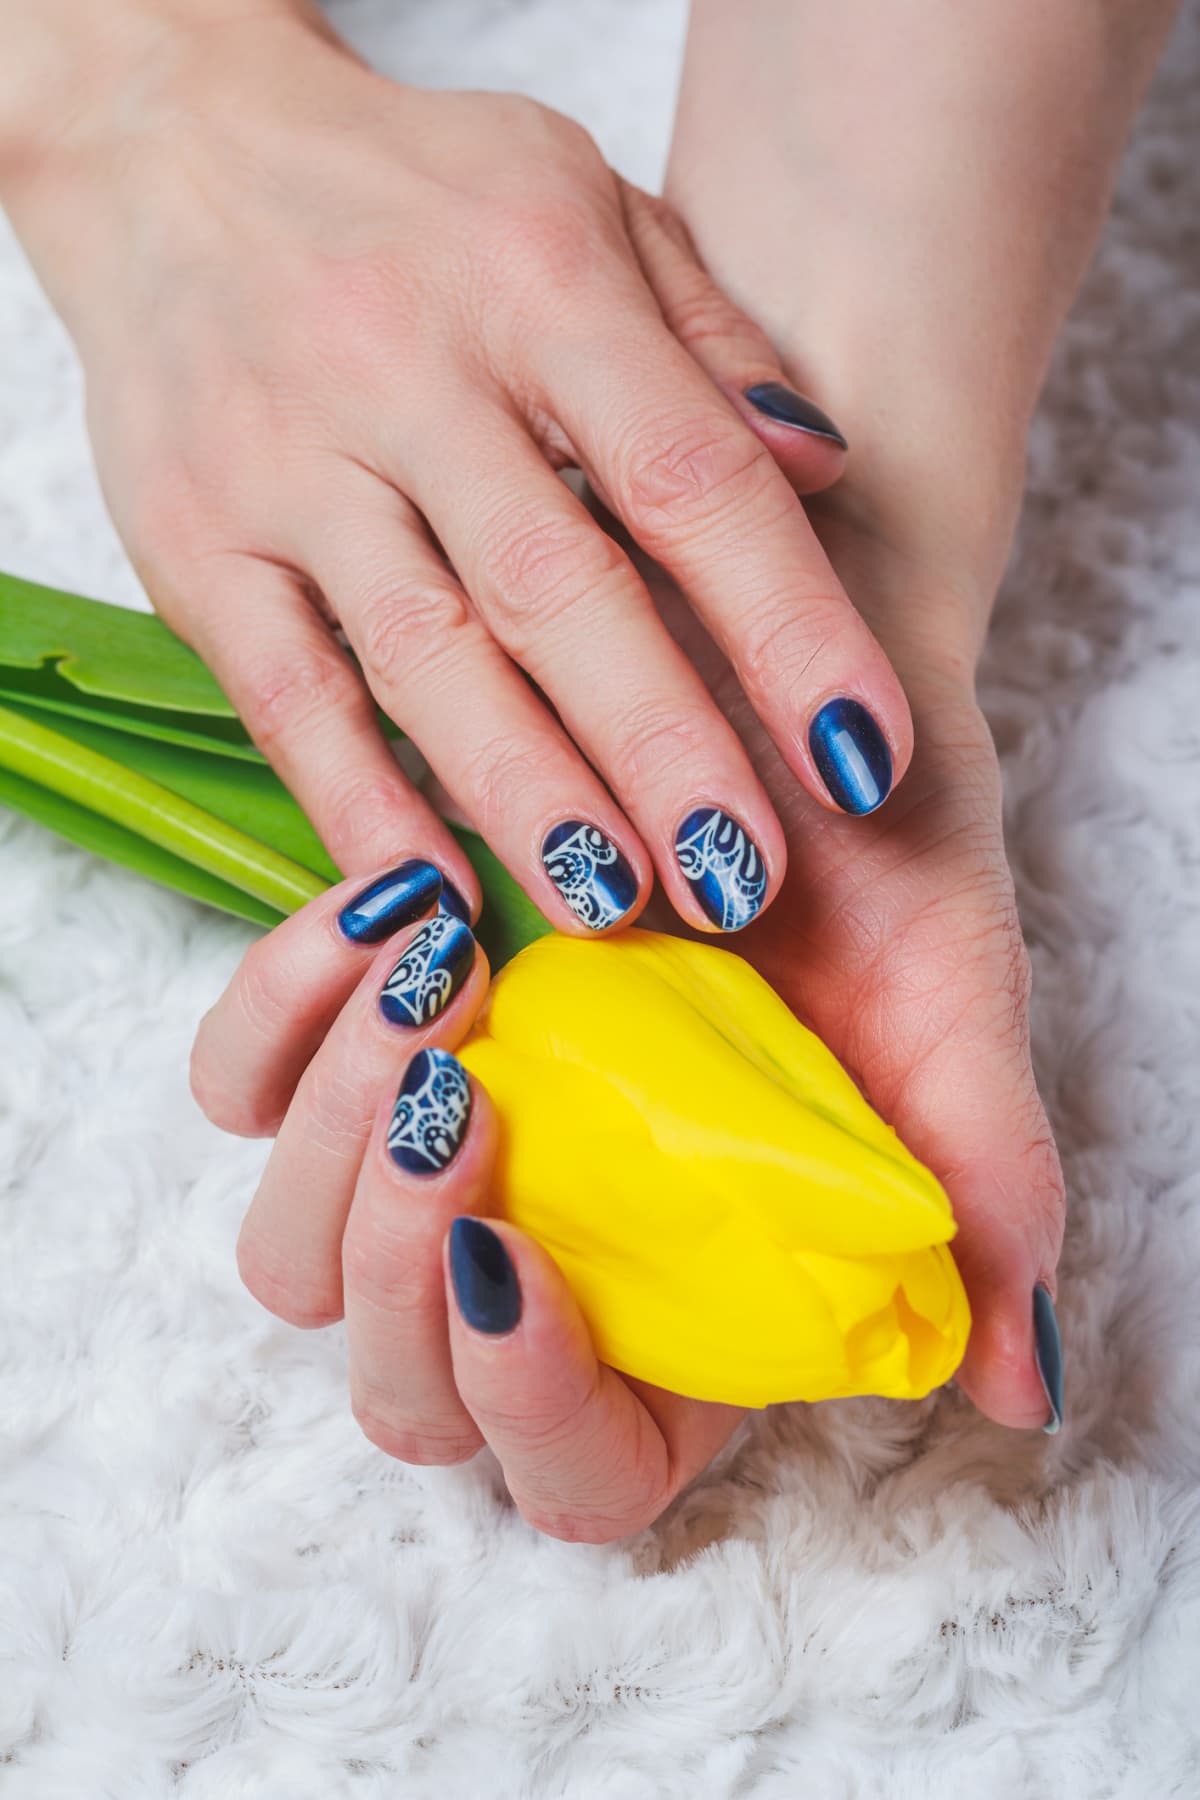 closeup of hands with a blue polish manicure with lace nail art